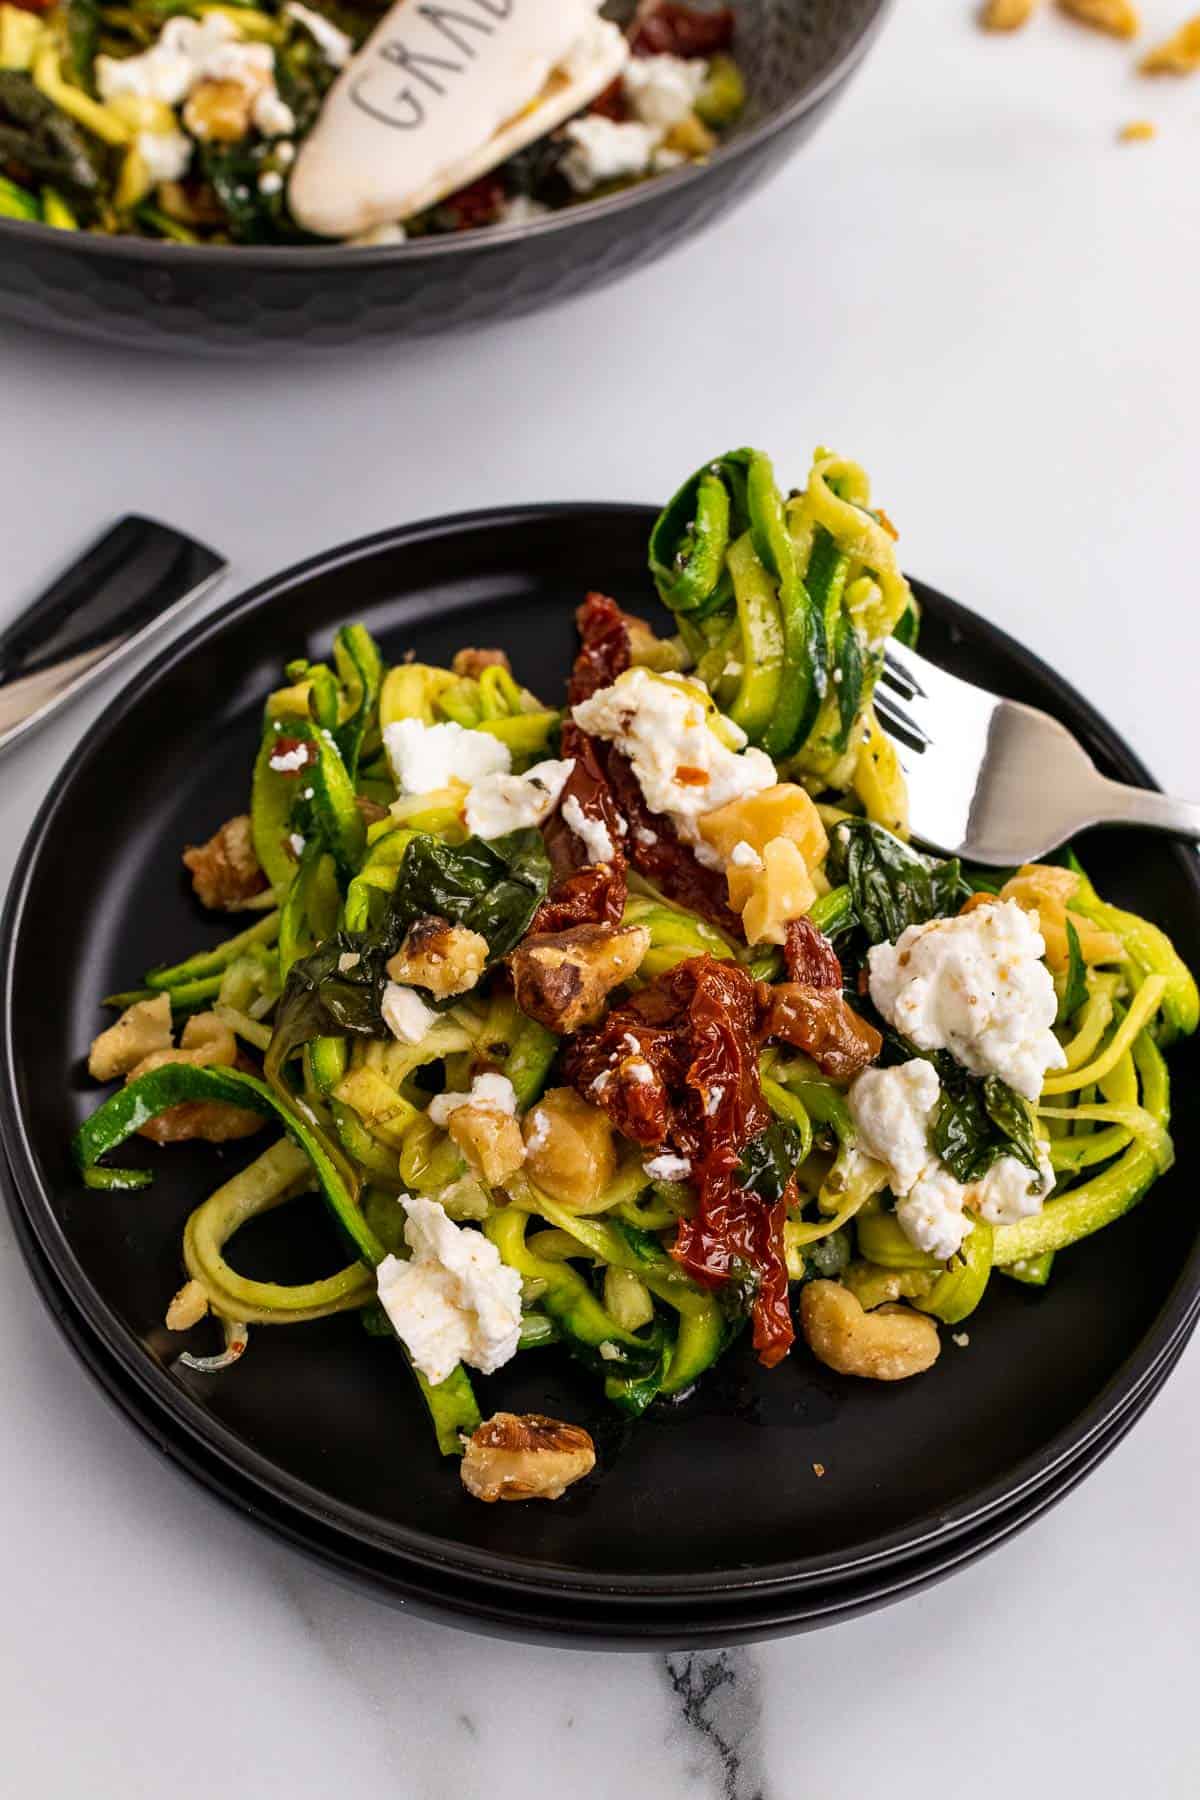 Zucchini noodles with goat cheese on a black plate